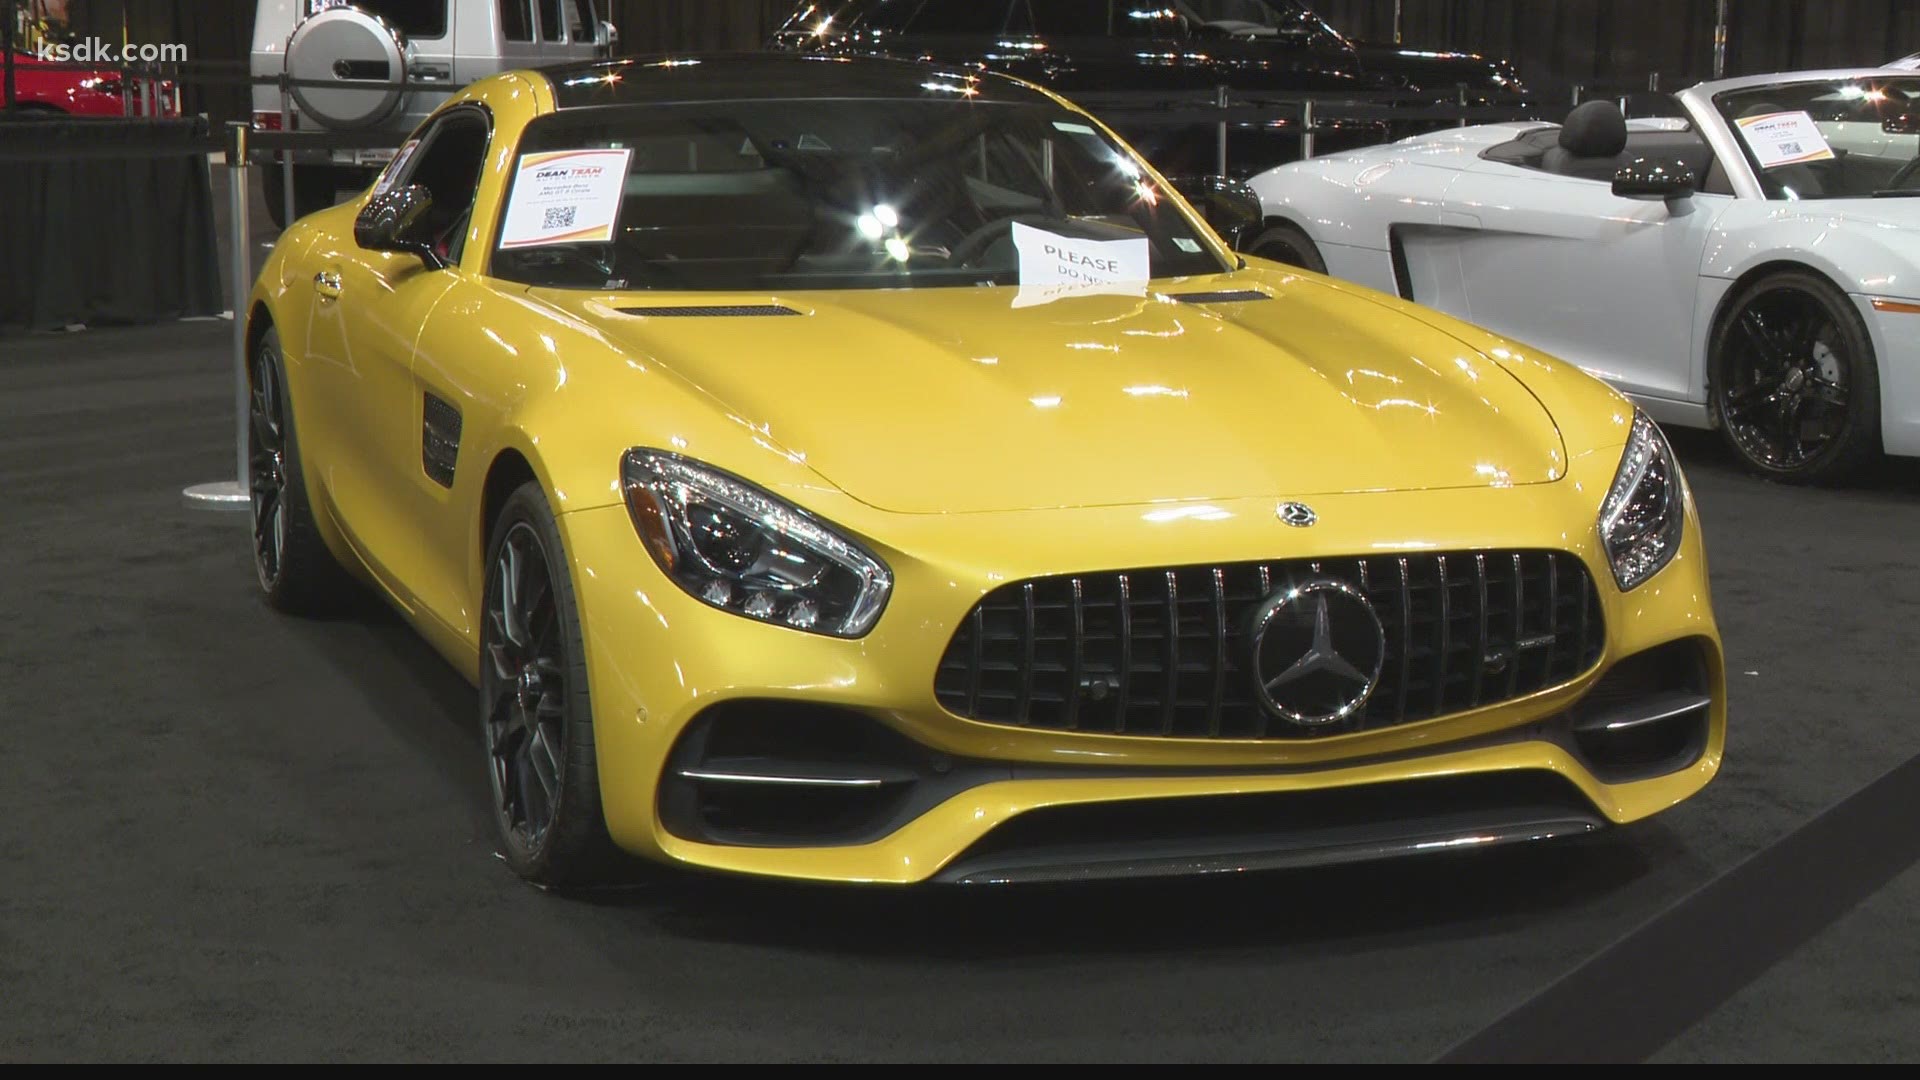 The St. Louis Auto Show and the St. Charles Home Show are both attracting crowds this weekend